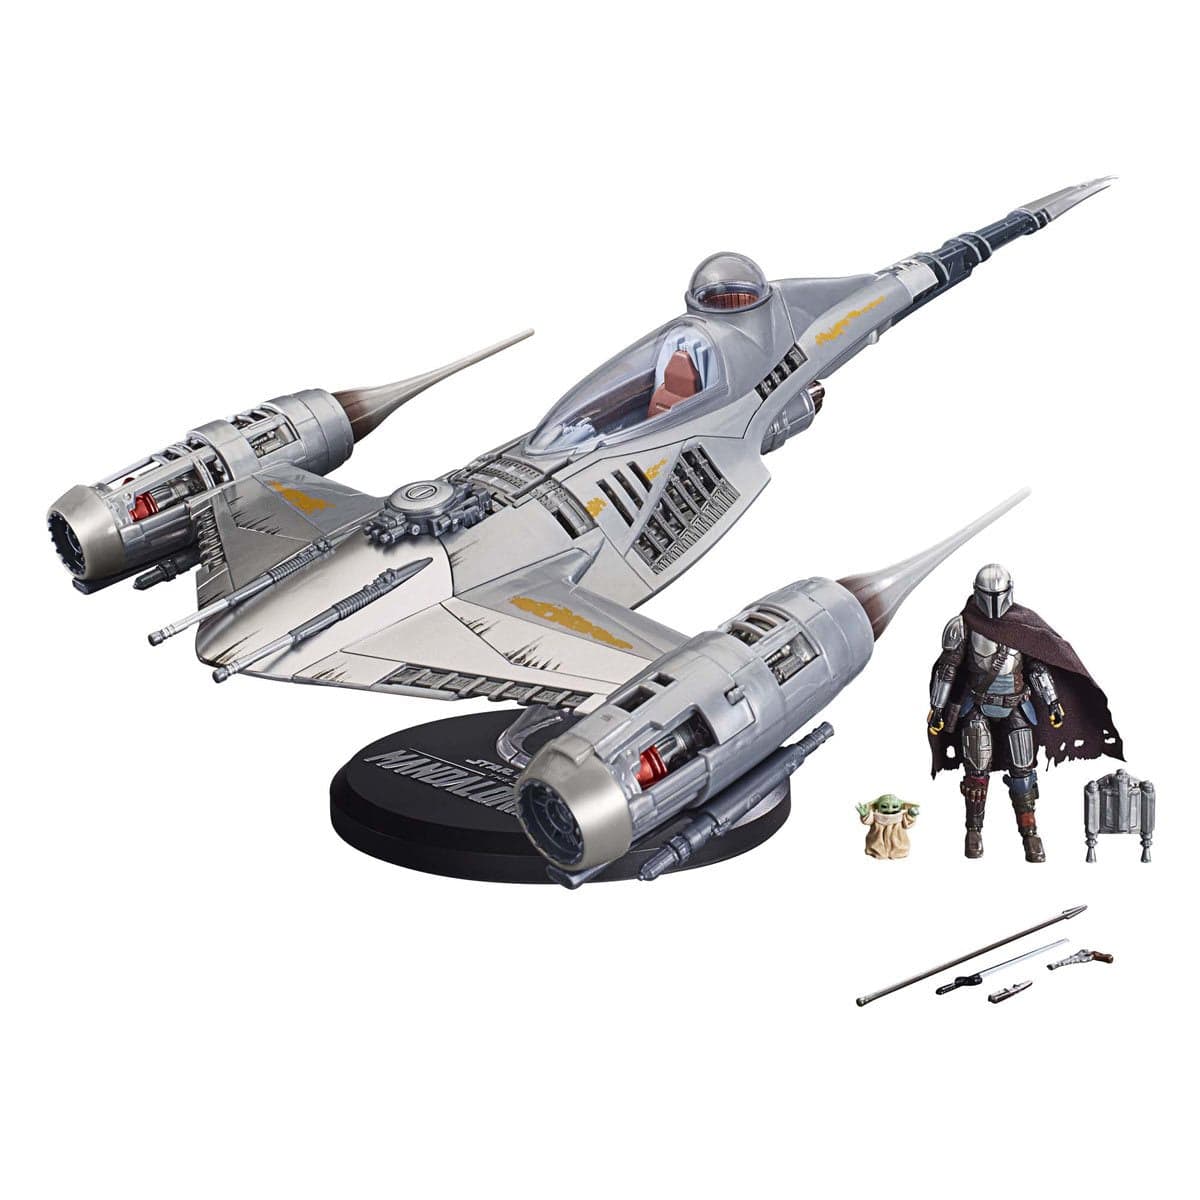 Star Wars Vehicles - 3.75" Vintage Collection - The Mandalorian - N-1 Starfighter - 5L00